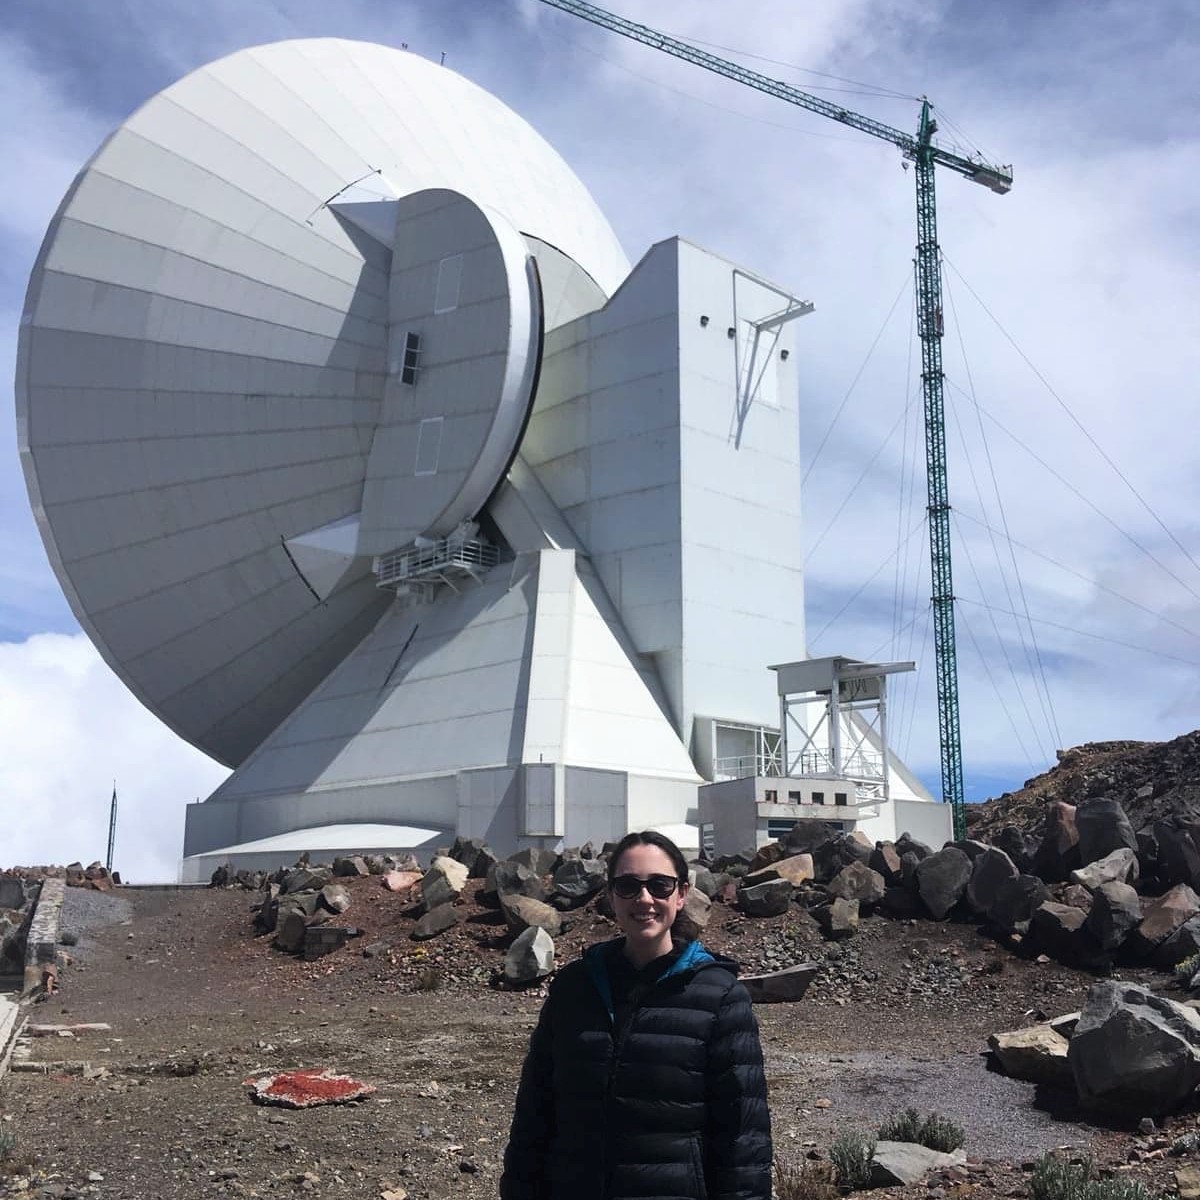 Eimear Gallagher is standing in front of the Large Millimetre Telescope